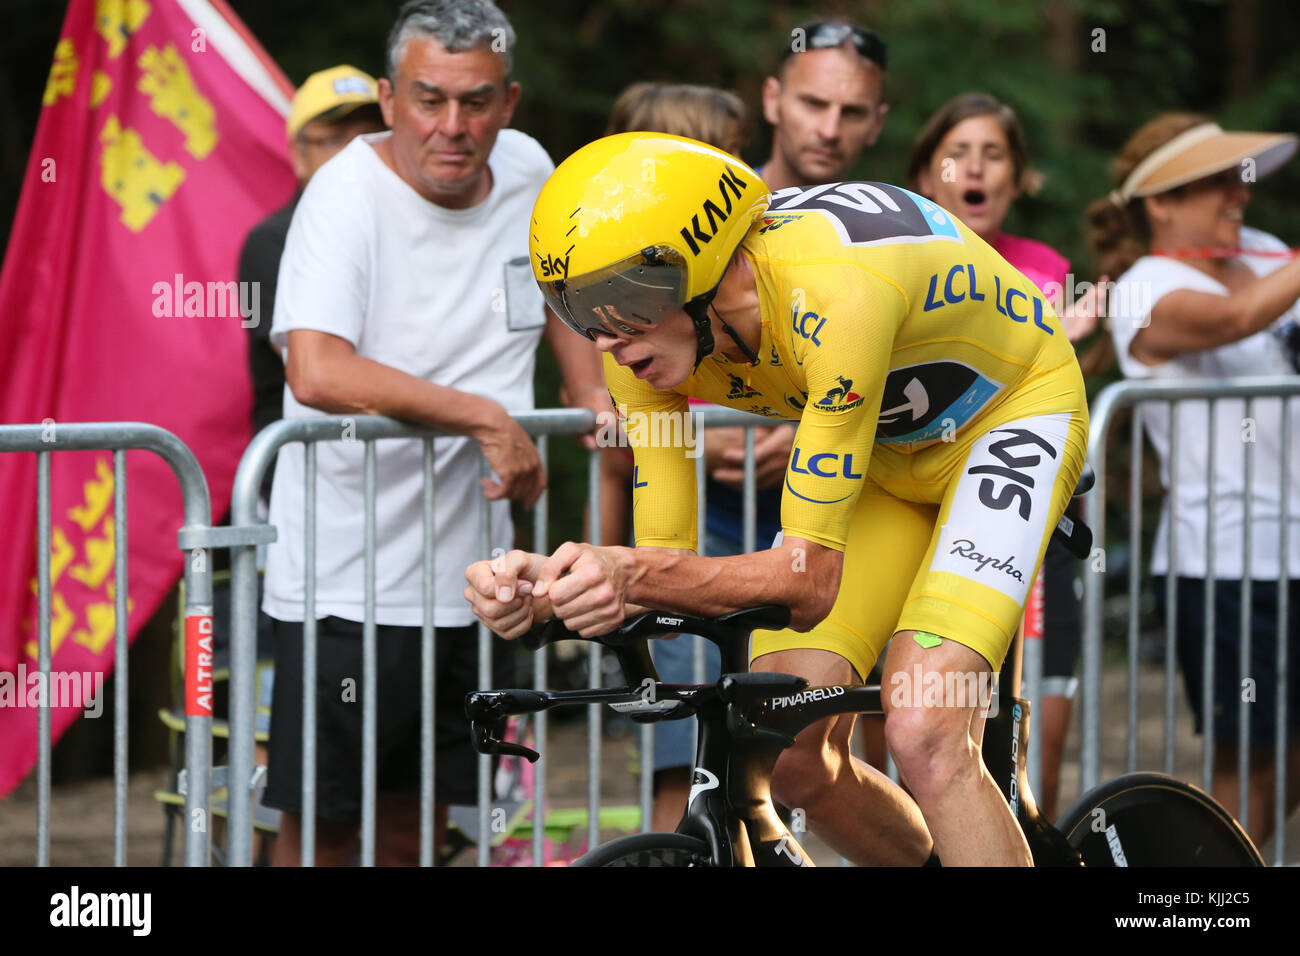 Le Tour de France 2016. Sallanches - Megeve in the french Alps.  Chris Froome of Great Britain and Team Sky.  France. Stock Photo